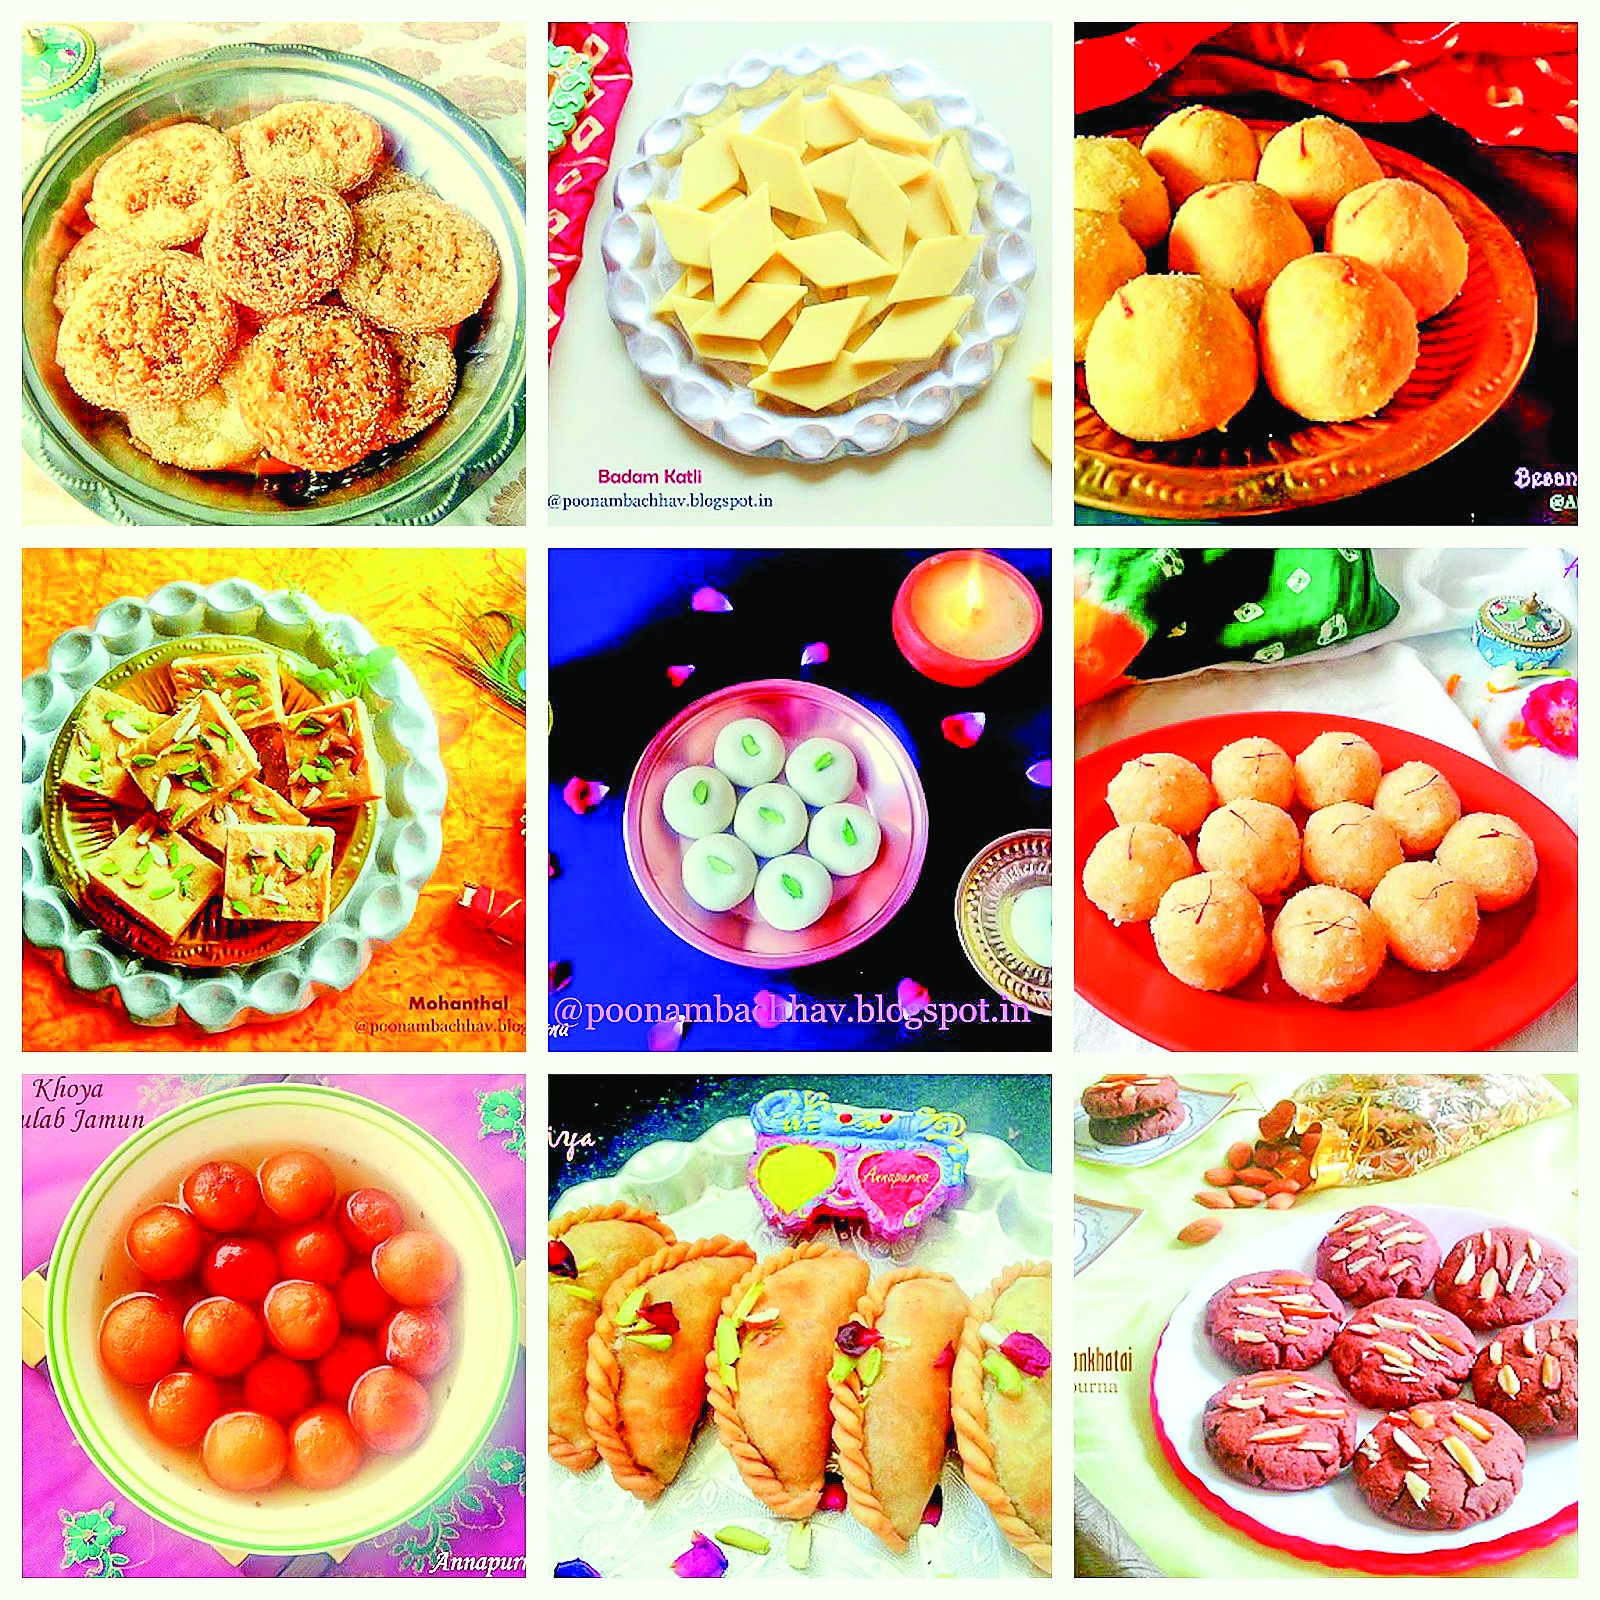 The Perfect Blend of Sweet and Spicy: Delicious Indian Snacks and Sweets